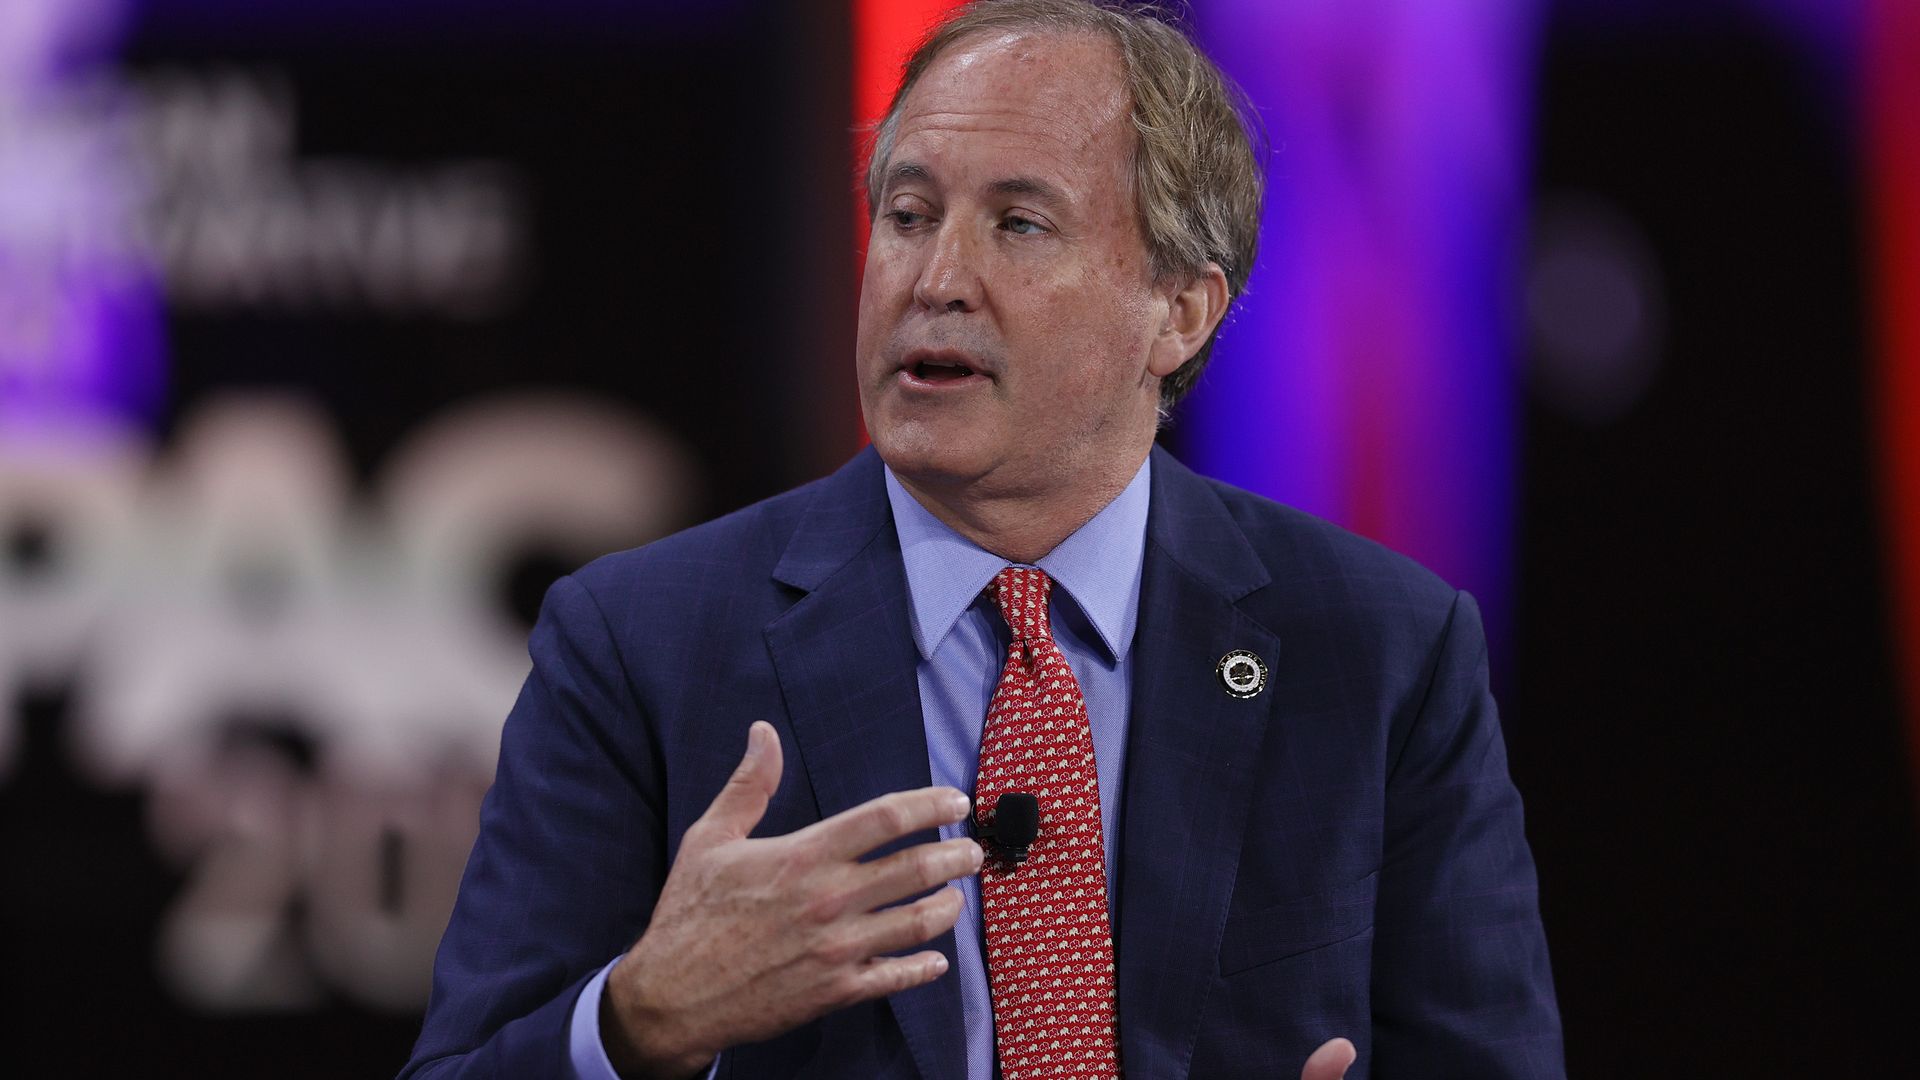 Ken Paxton, Texas Attorney General, speaks during a panel discussion about the Devaluing of American Citizenship during the Conservative Political Action Conference held in the Hyatt Regency.